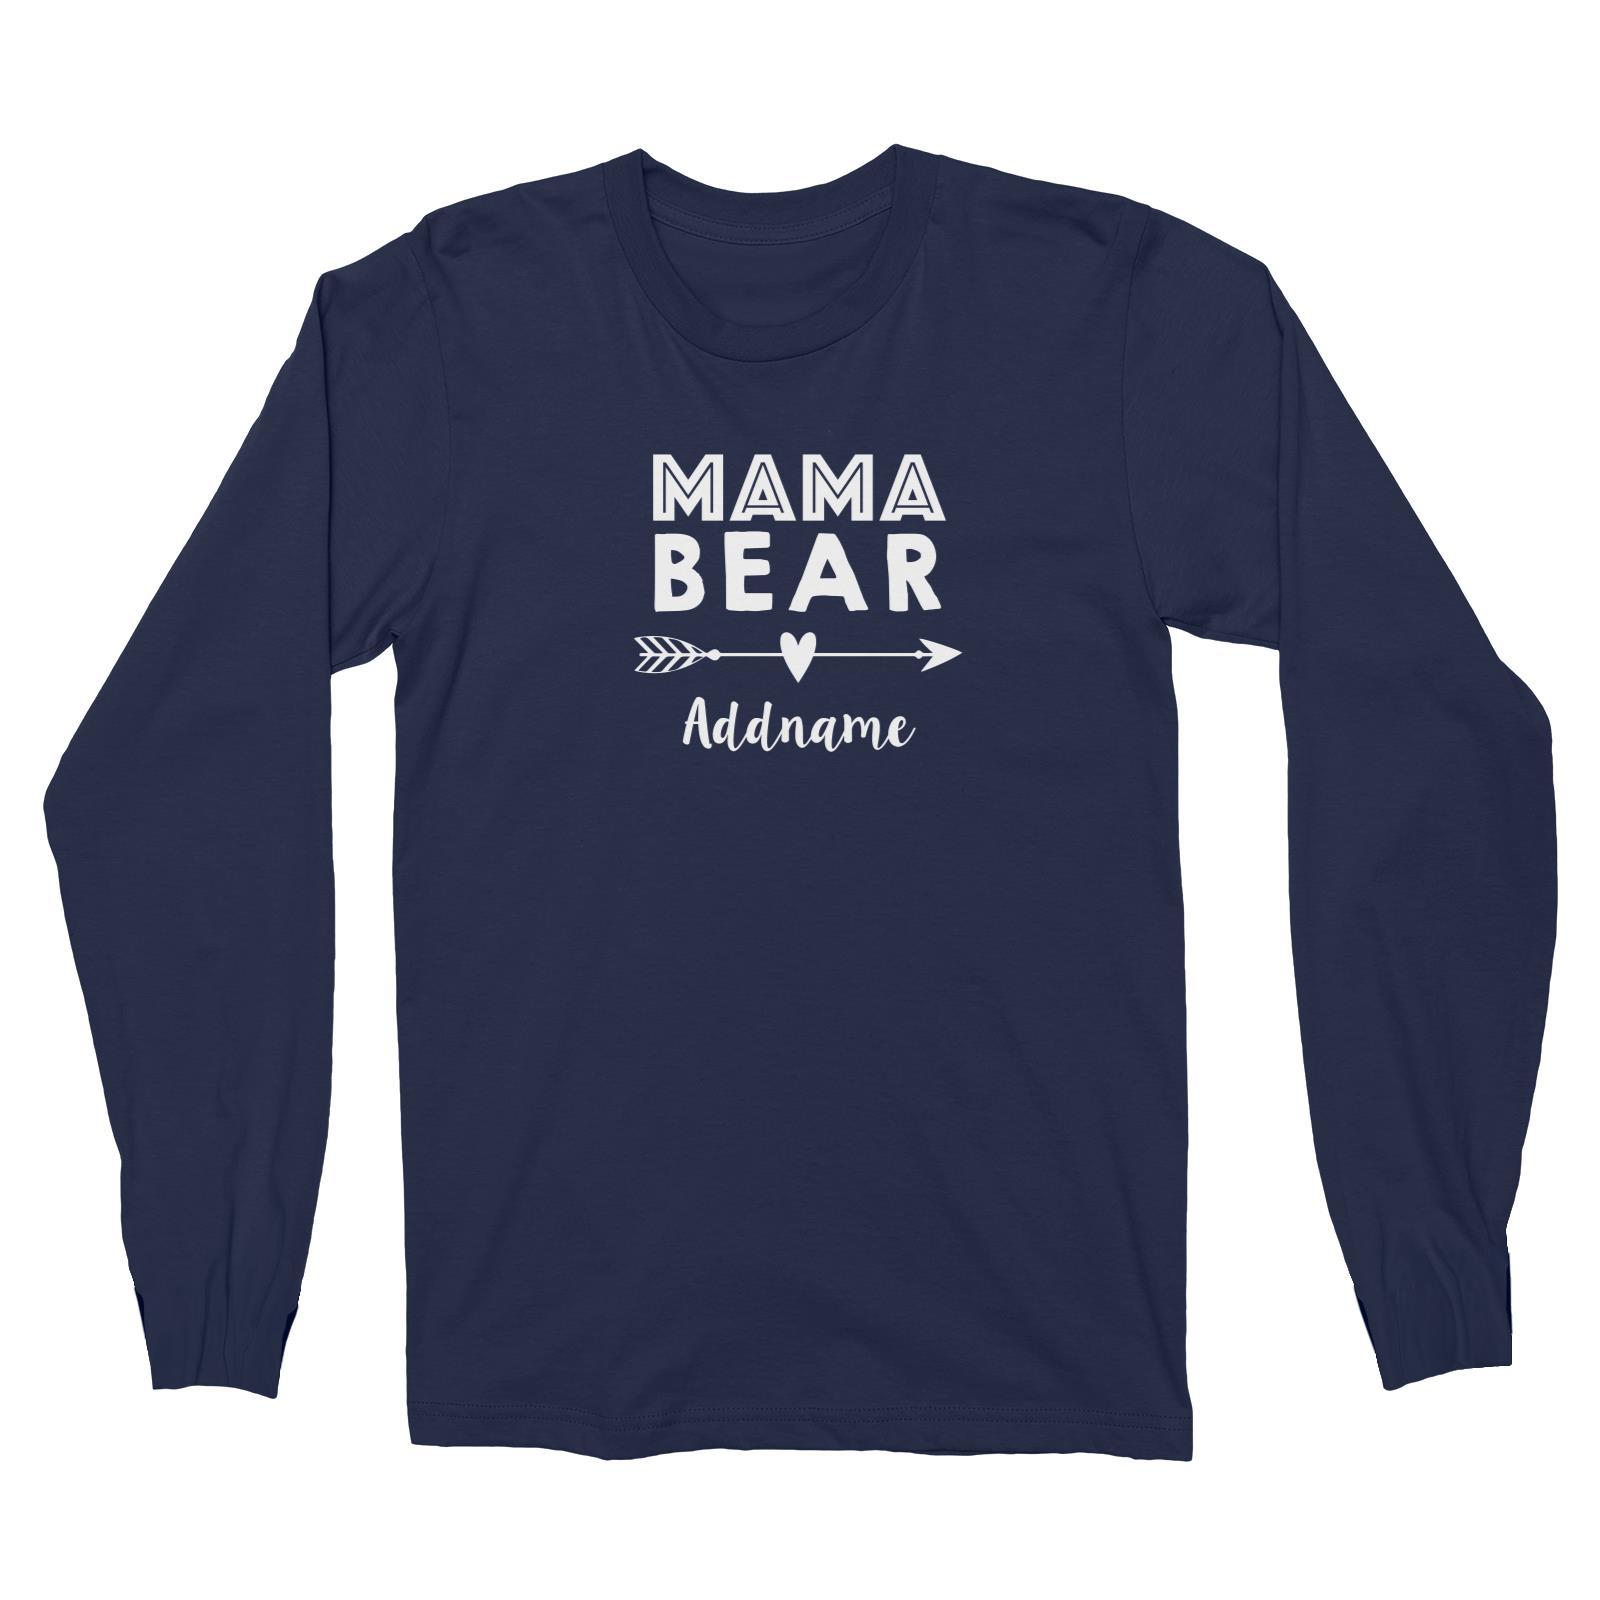 Mama Bear Addname Long Sleeve Unisex T-Shirt  Matching Family Personalizable Designs